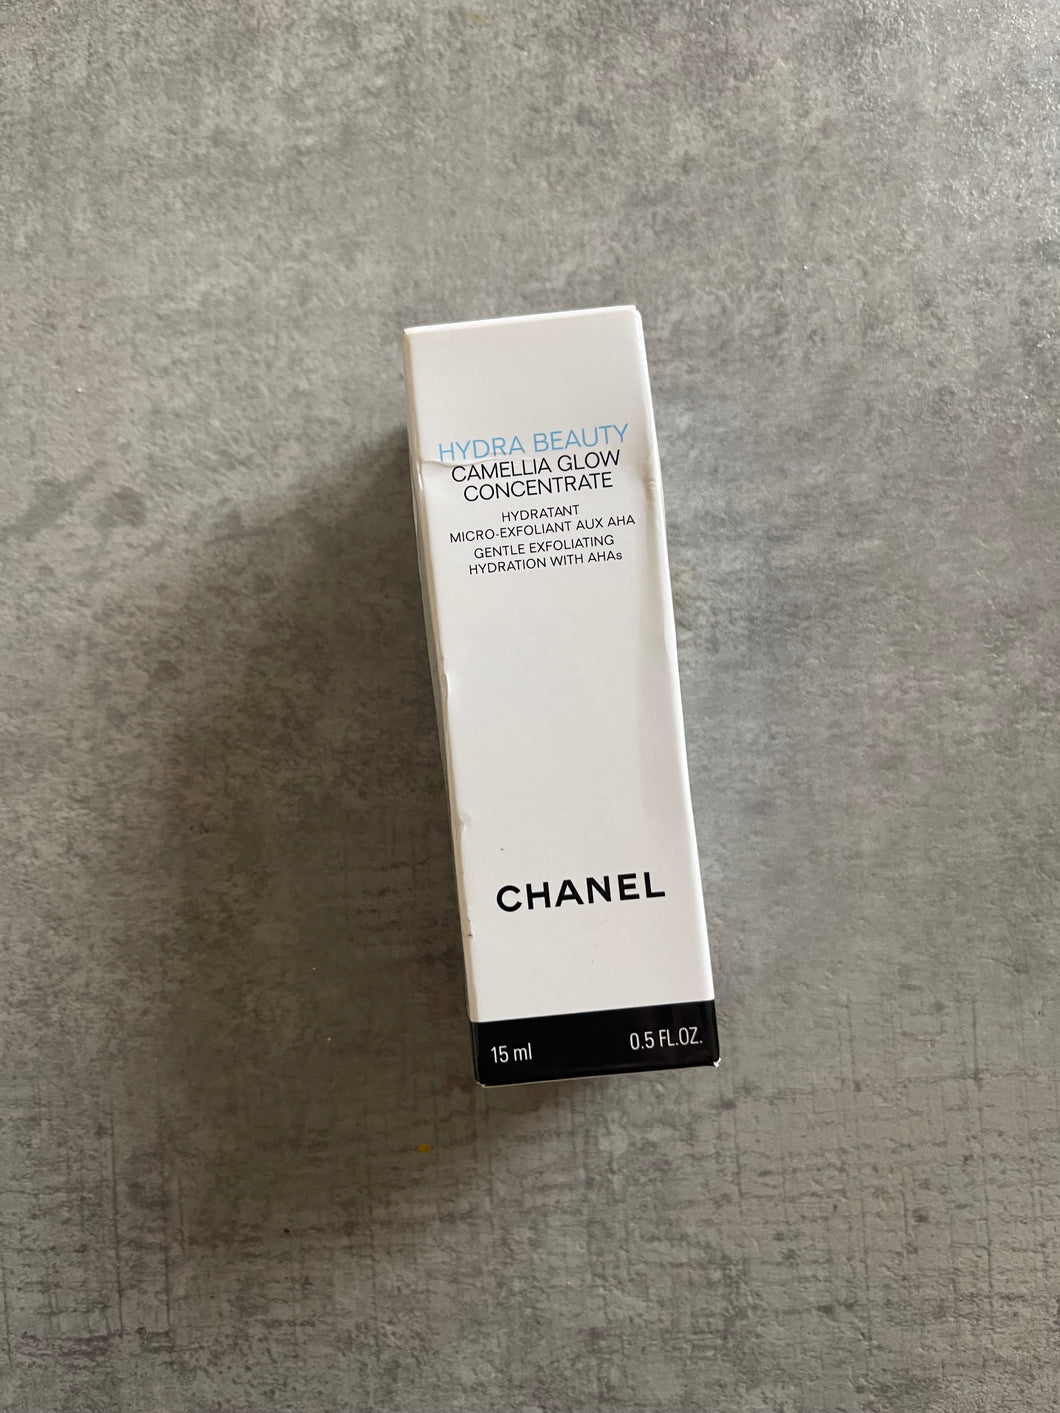 CHANEL HYDRA BEAUTY CAMELLIA GLOW CONCENTRATE  Gentle Exfoliating Hydration With AHAs